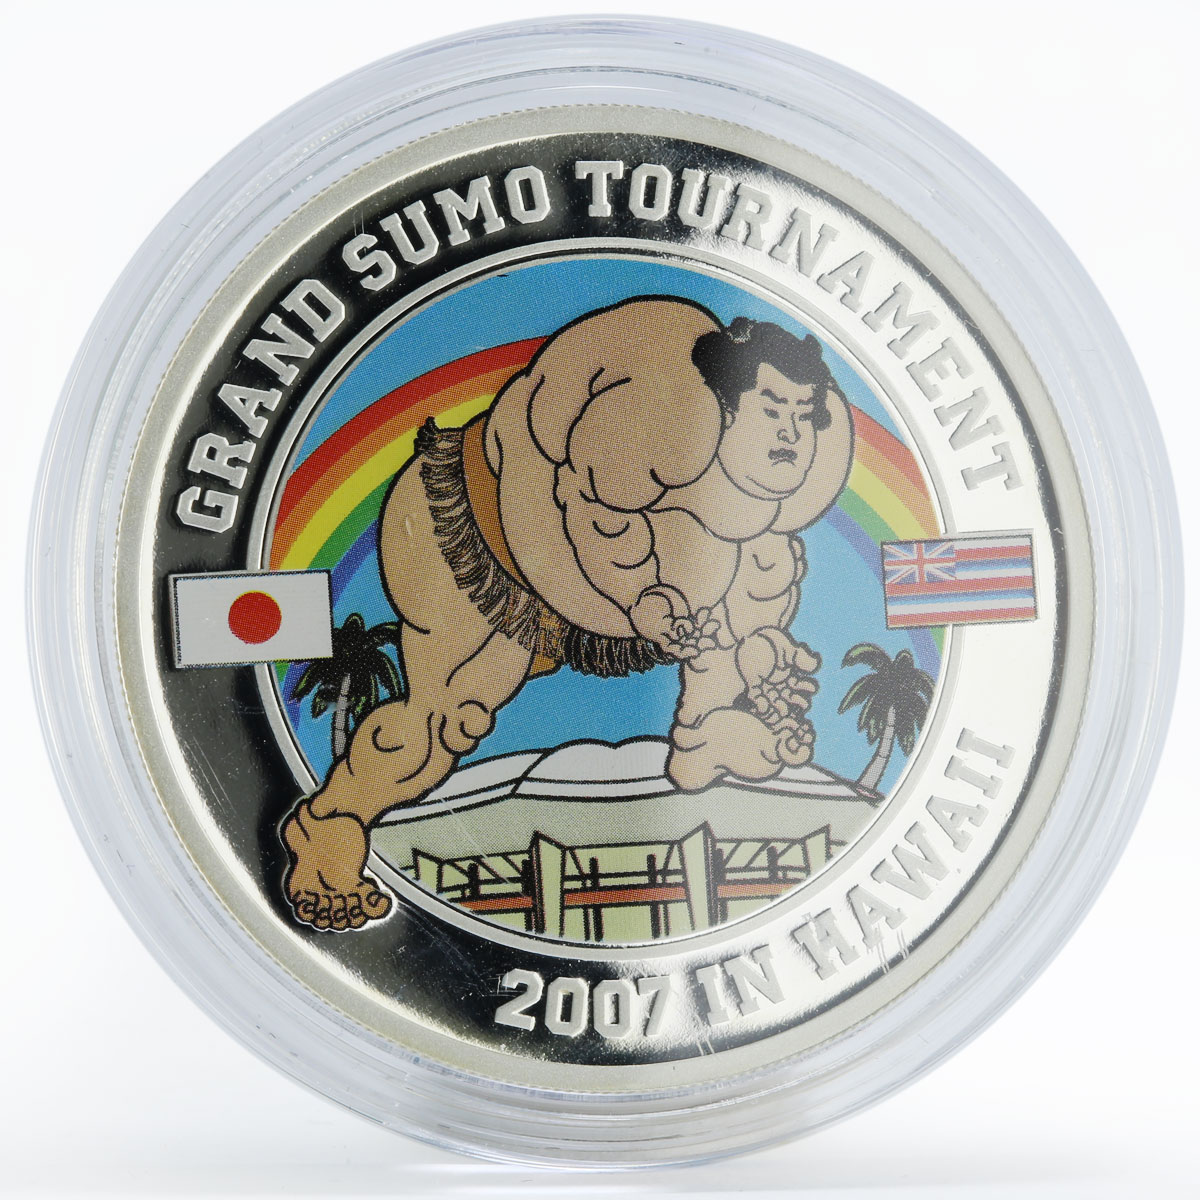 Tuvalu 1 dollar Grand Sumo Tournament Hawaii colored proof silver coin 2007